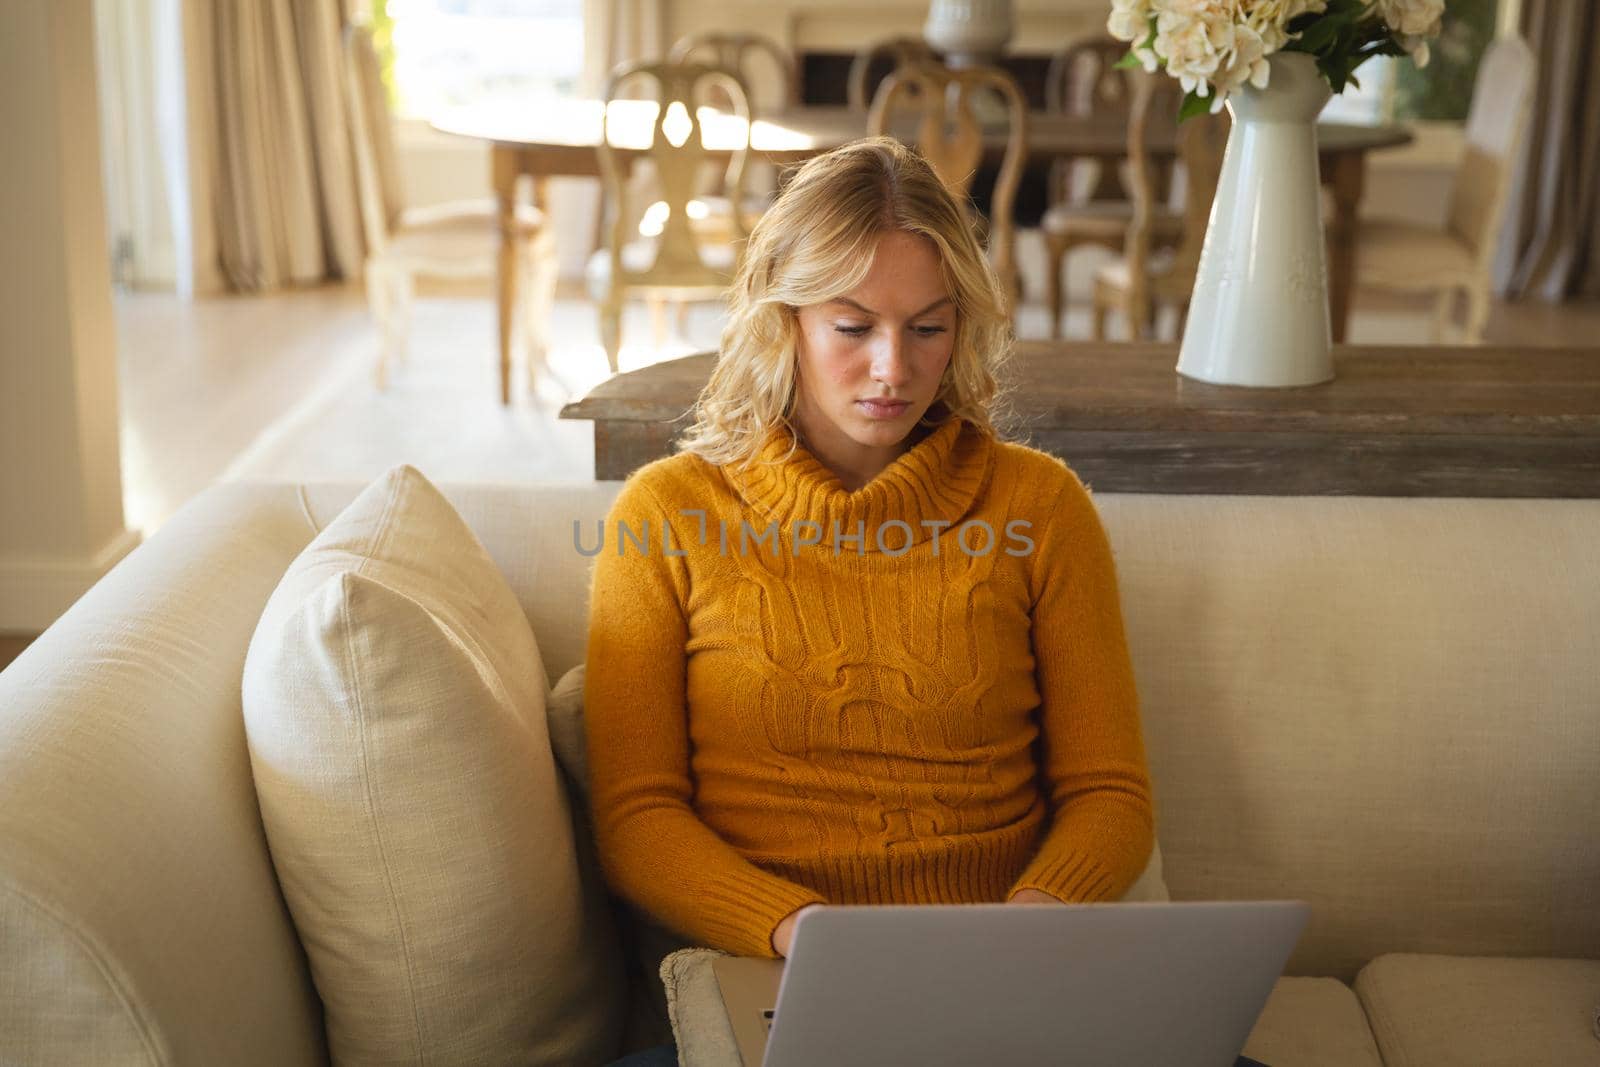 Caucasian woman sitting on couch in luxury living room using laptop, concentrating by Wavebreakmedia